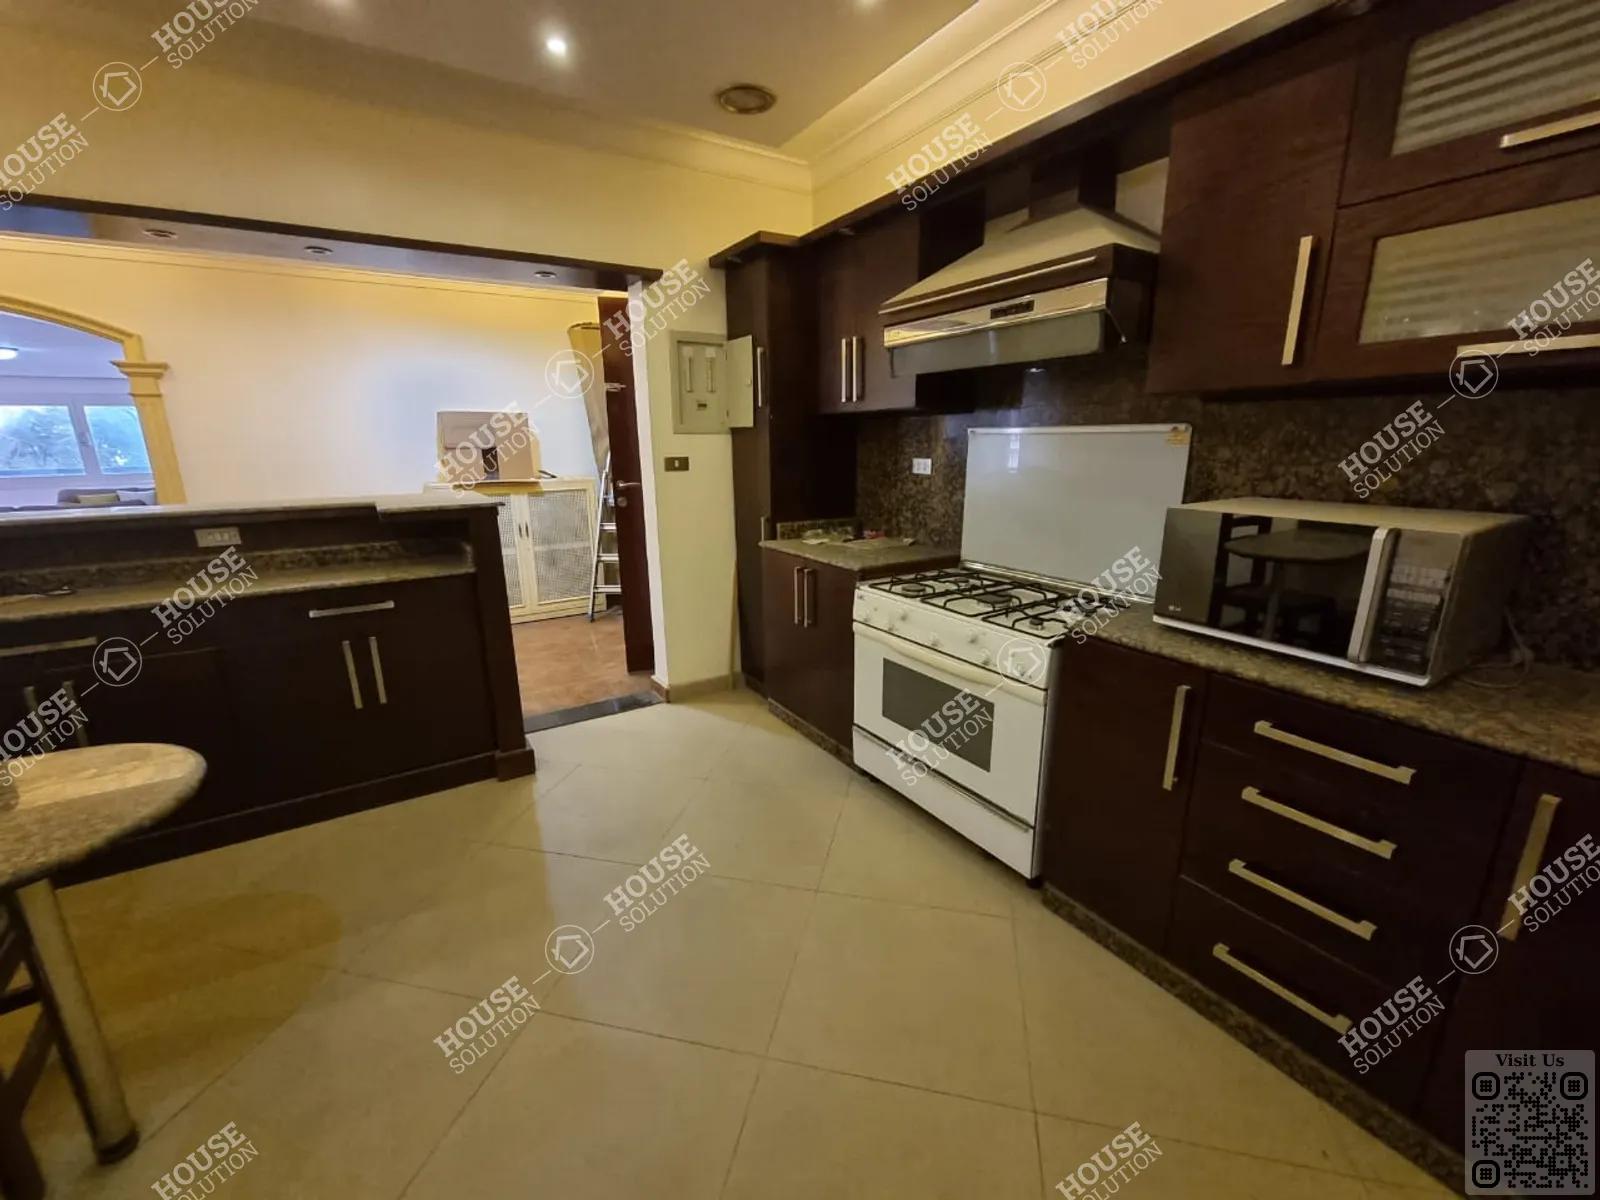 KITCHEN  @ Apartments For Rent In Maadi Maadi Sarayat Area: 200 m² consists of 3 Bedrooms 2 Bathrooms Furnished 5 stars #2546-1